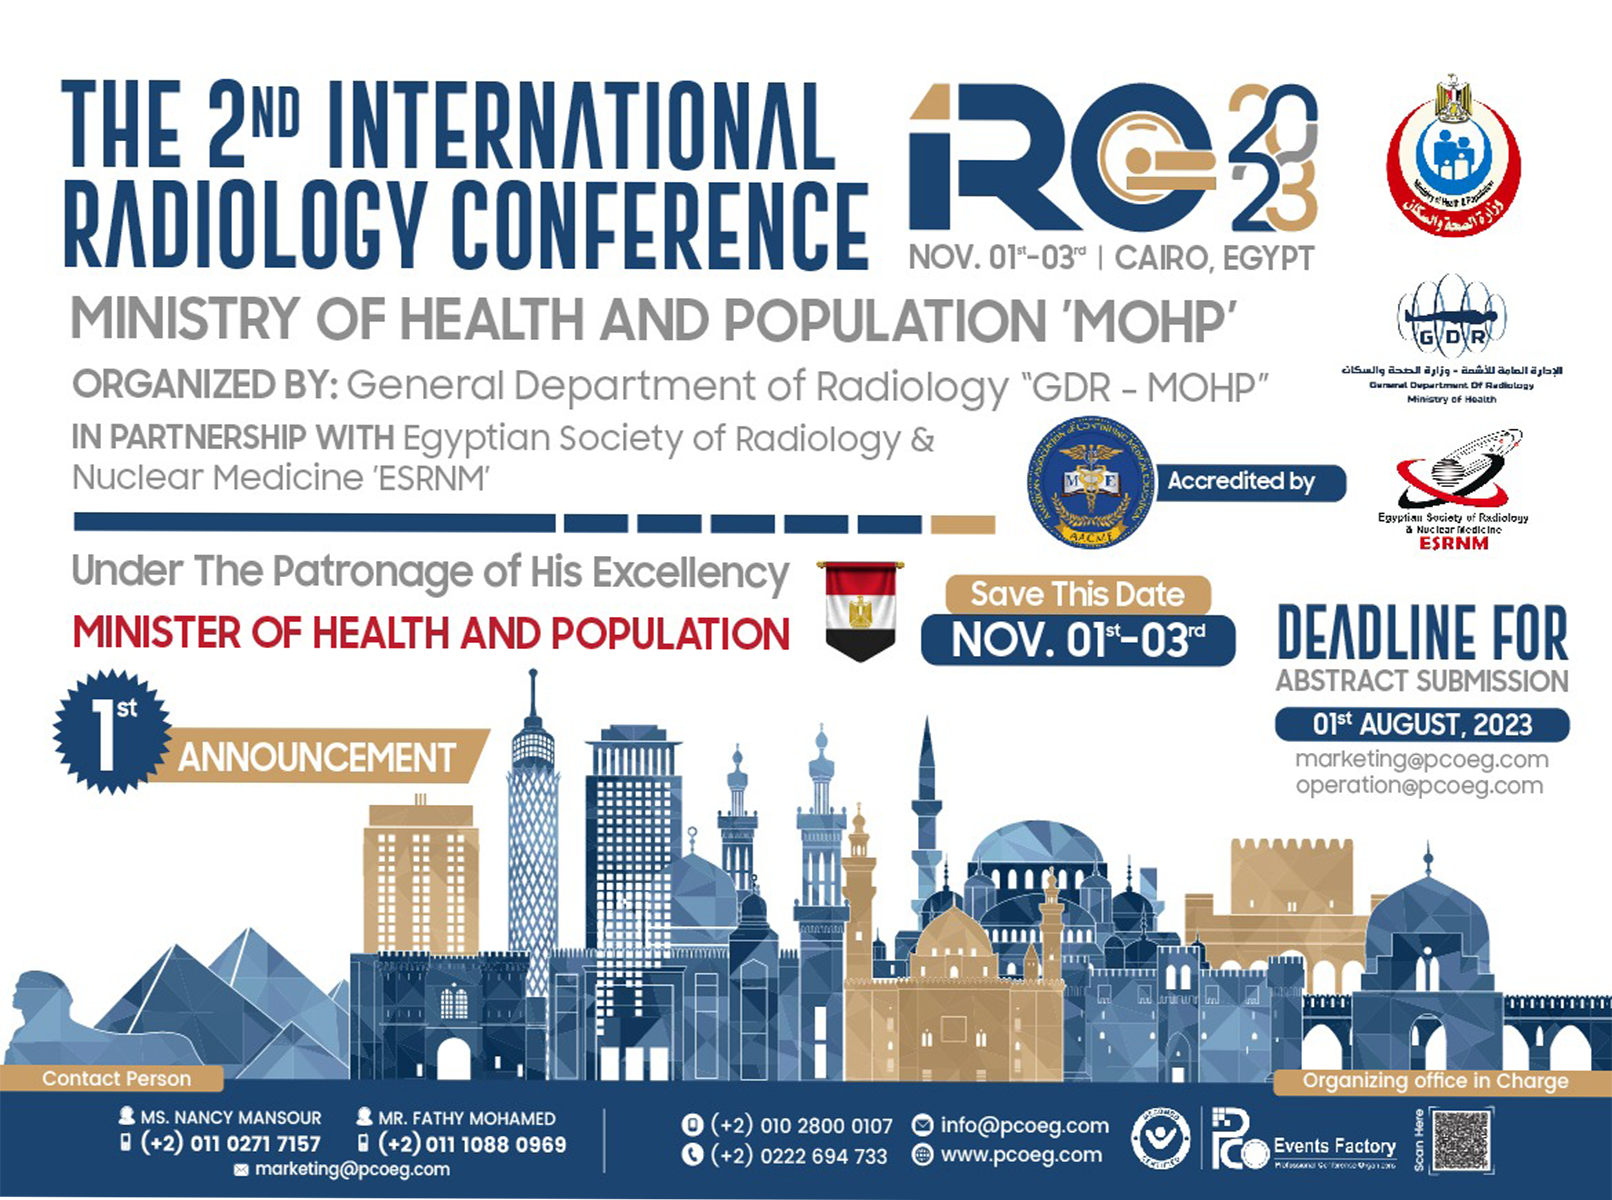 The 2nd International Radiology Conference of Ministry of Health